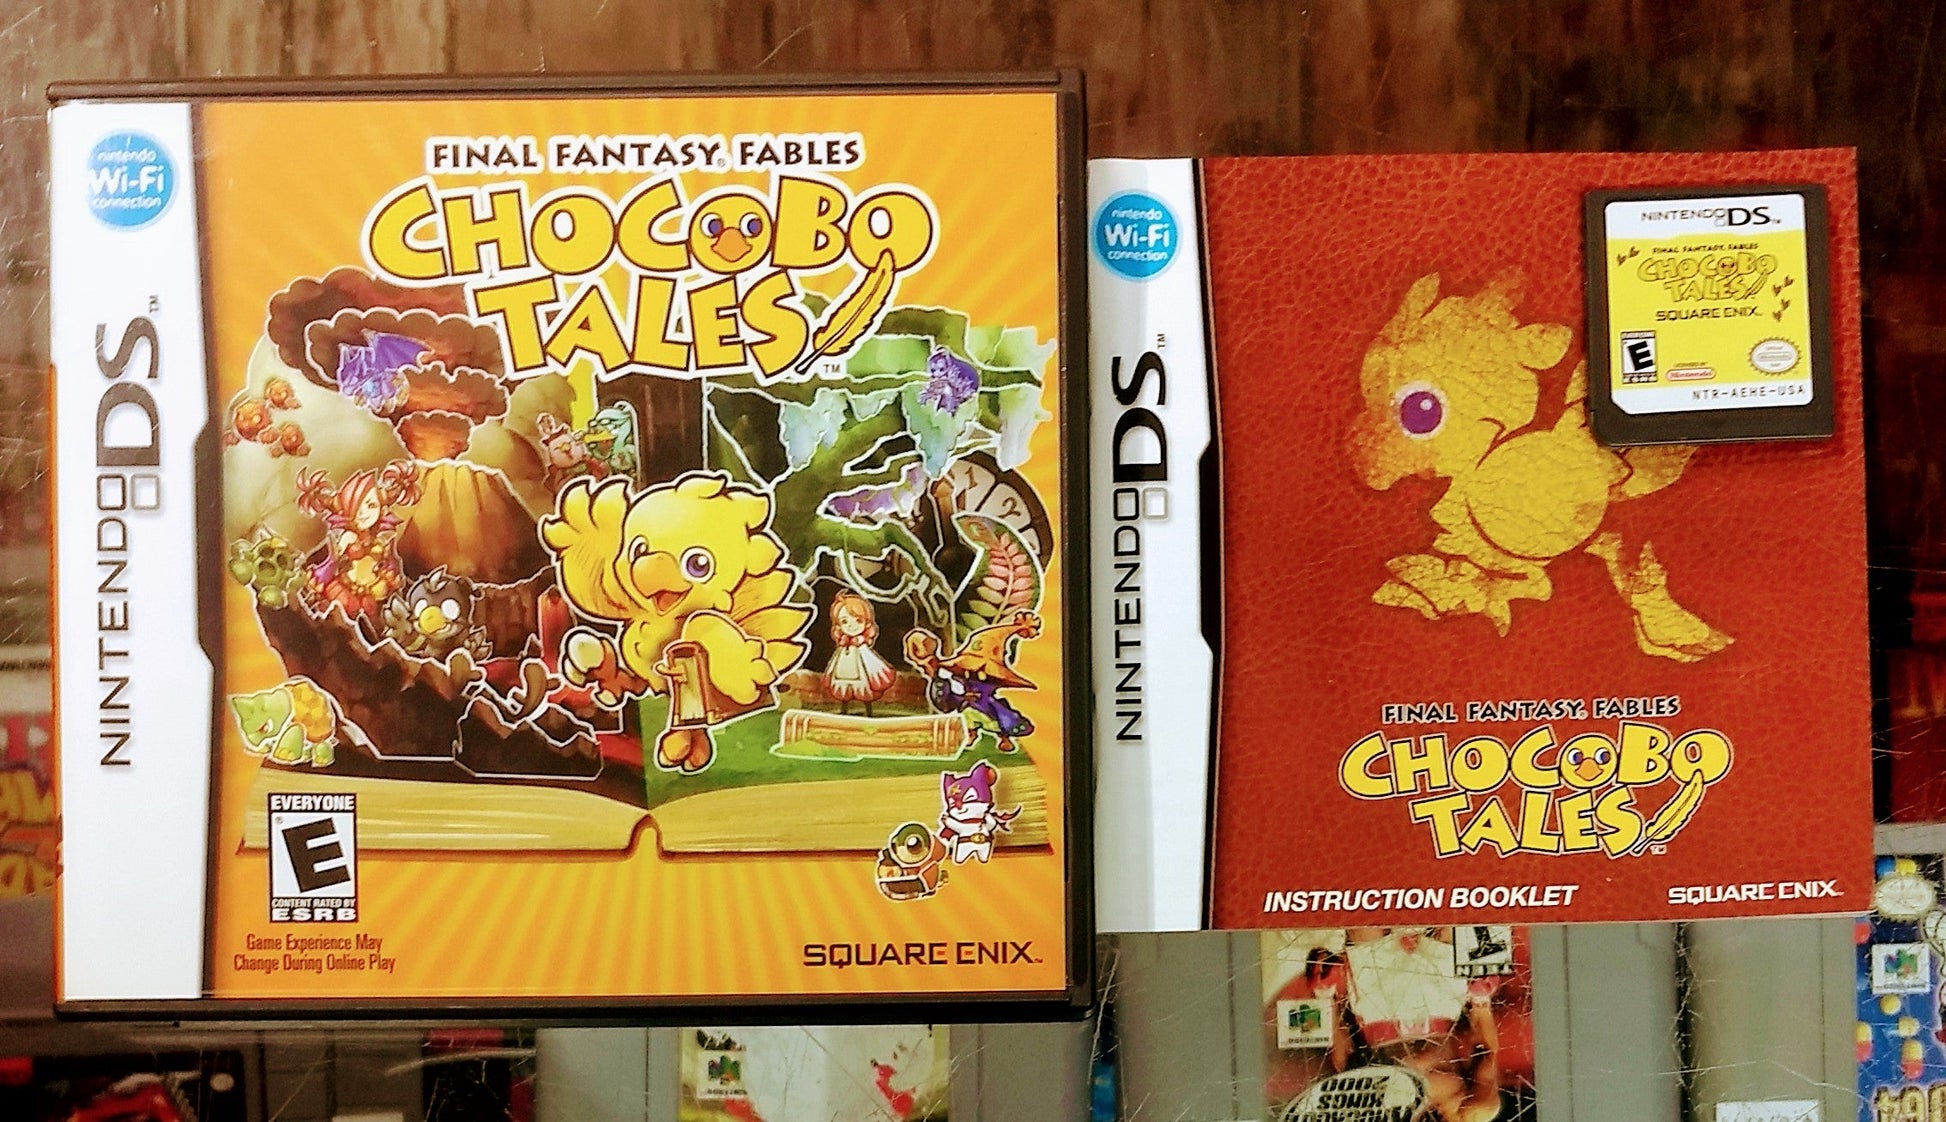 FINAL FANTASY FABLES: CHOCOBO TALES (NINTENDO DS) - jeux video game-x